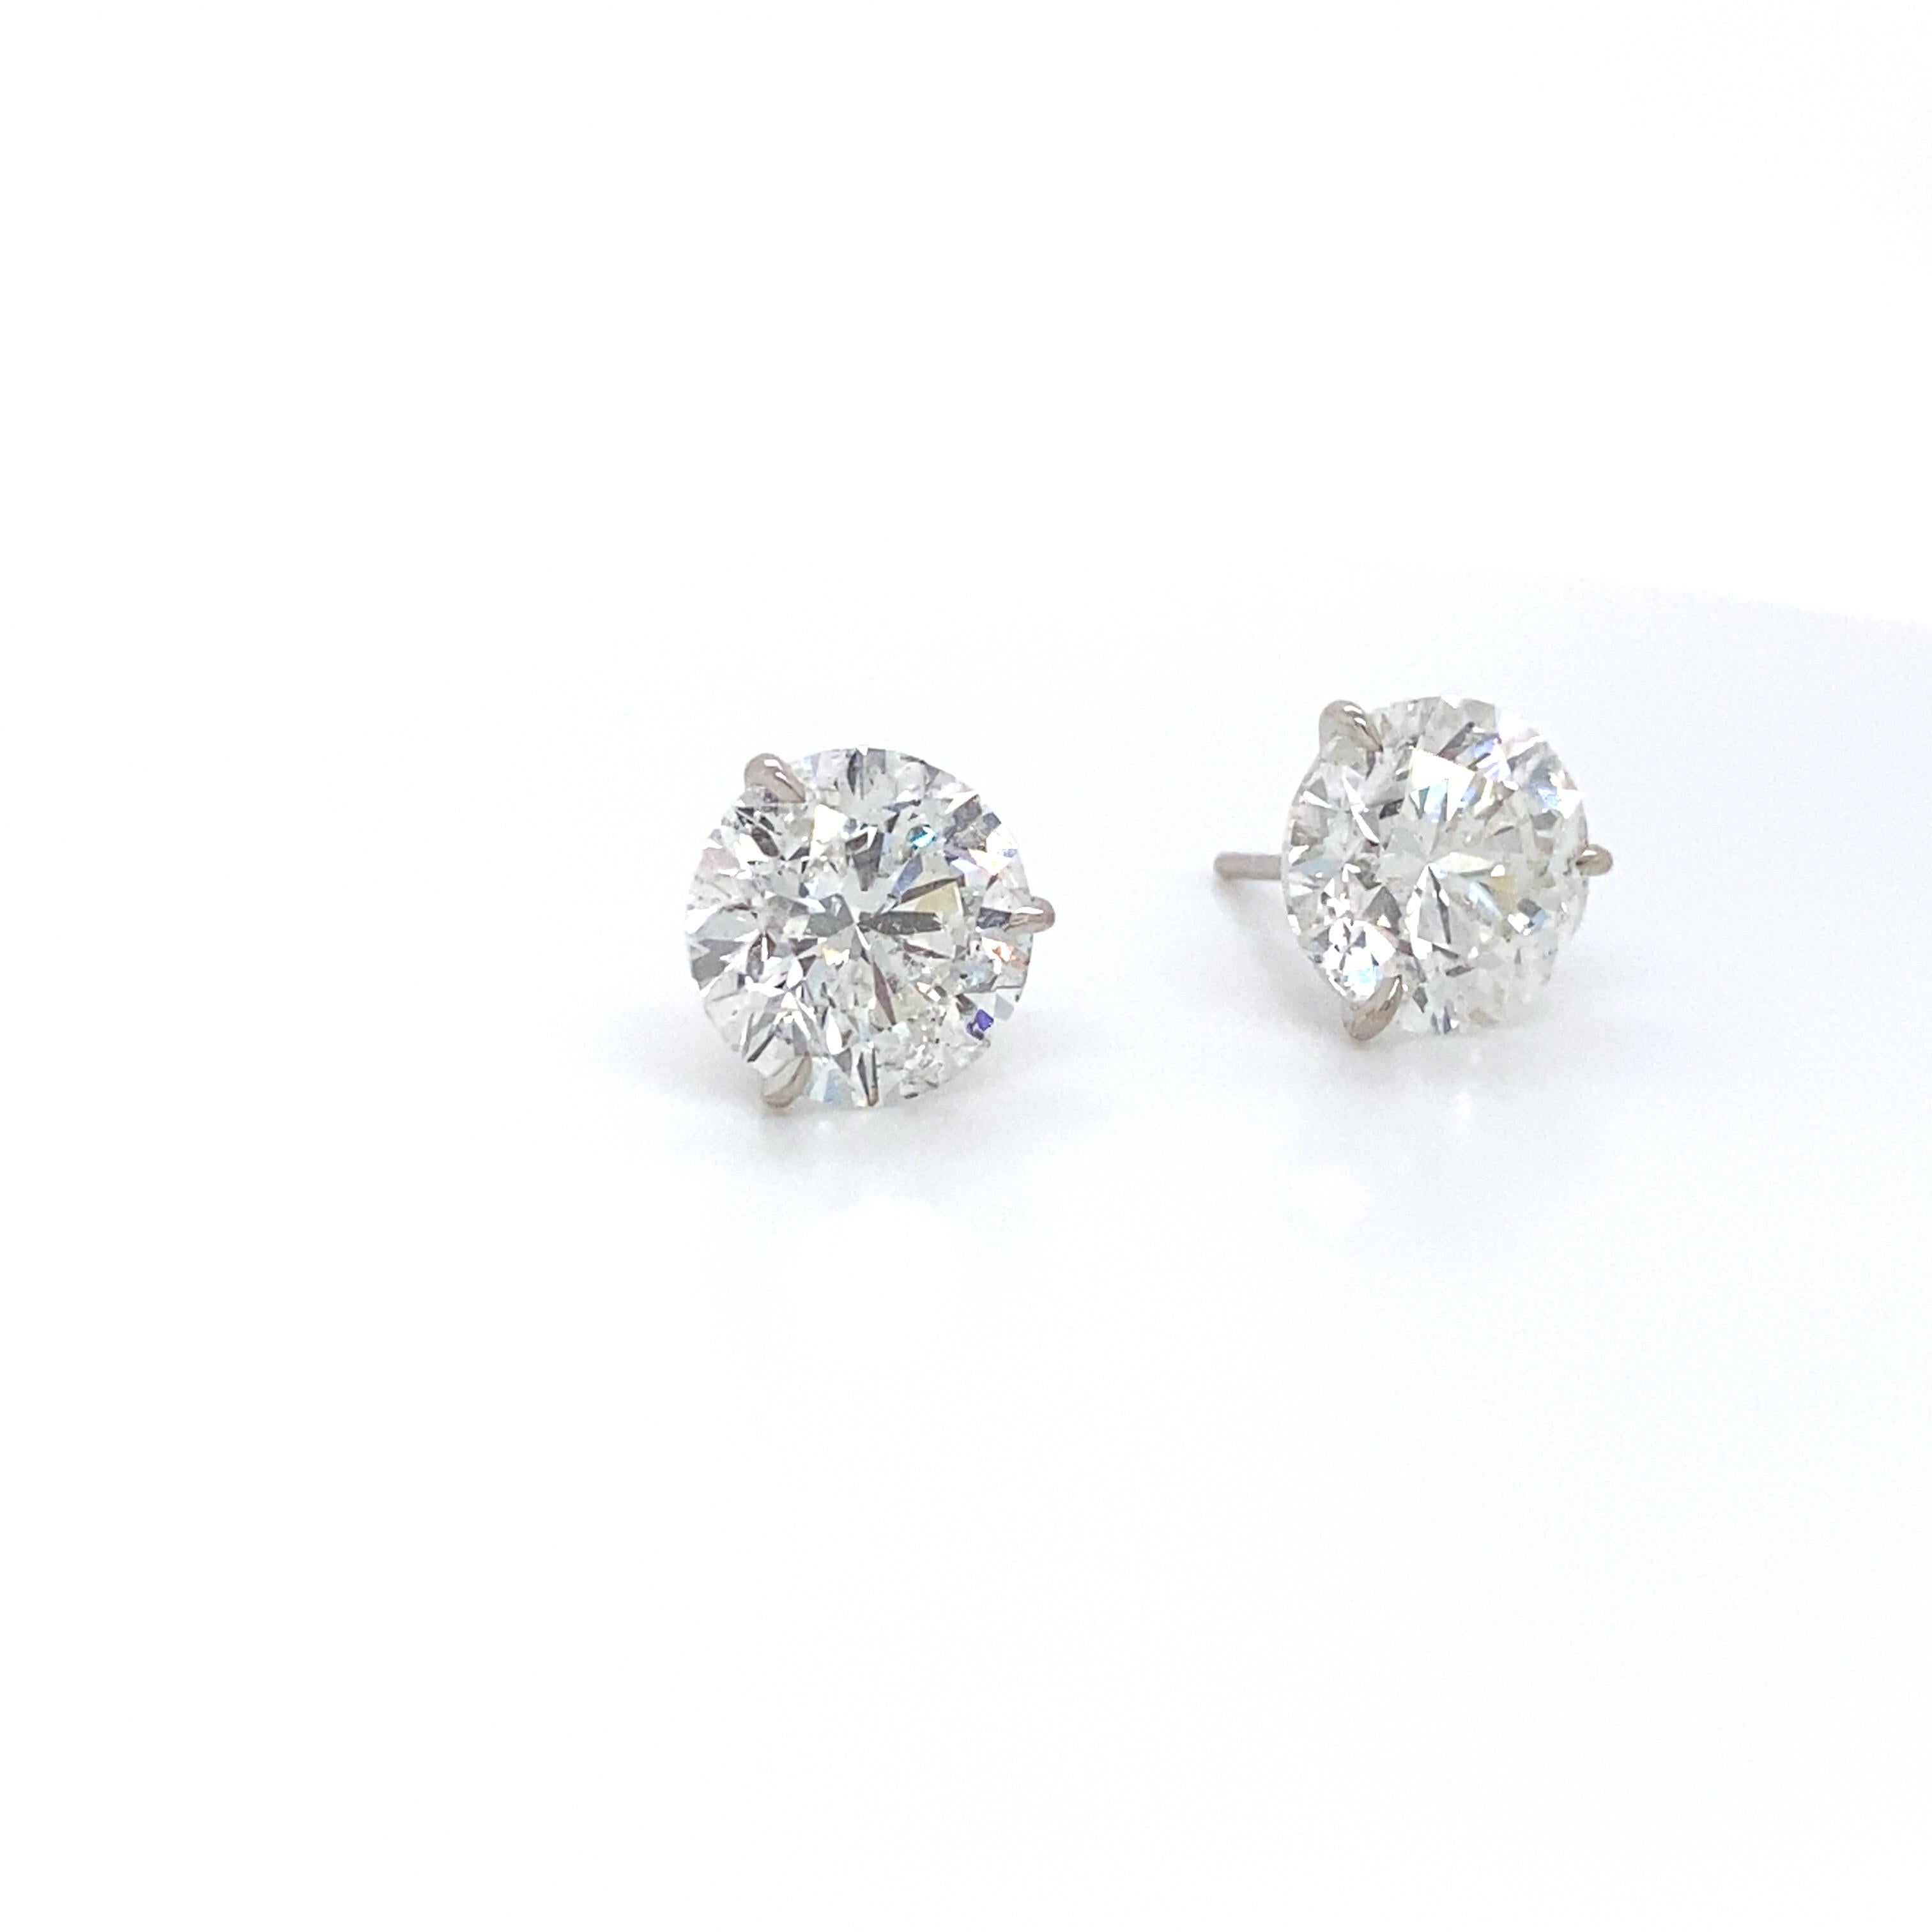 18K White gold diamond stud earrings weighing 2.84 carats in a 3 prong champagne setting.
Color H-I
Clarity SI2-I1

Very Brilliant Cut Stones. 
Eye Clean